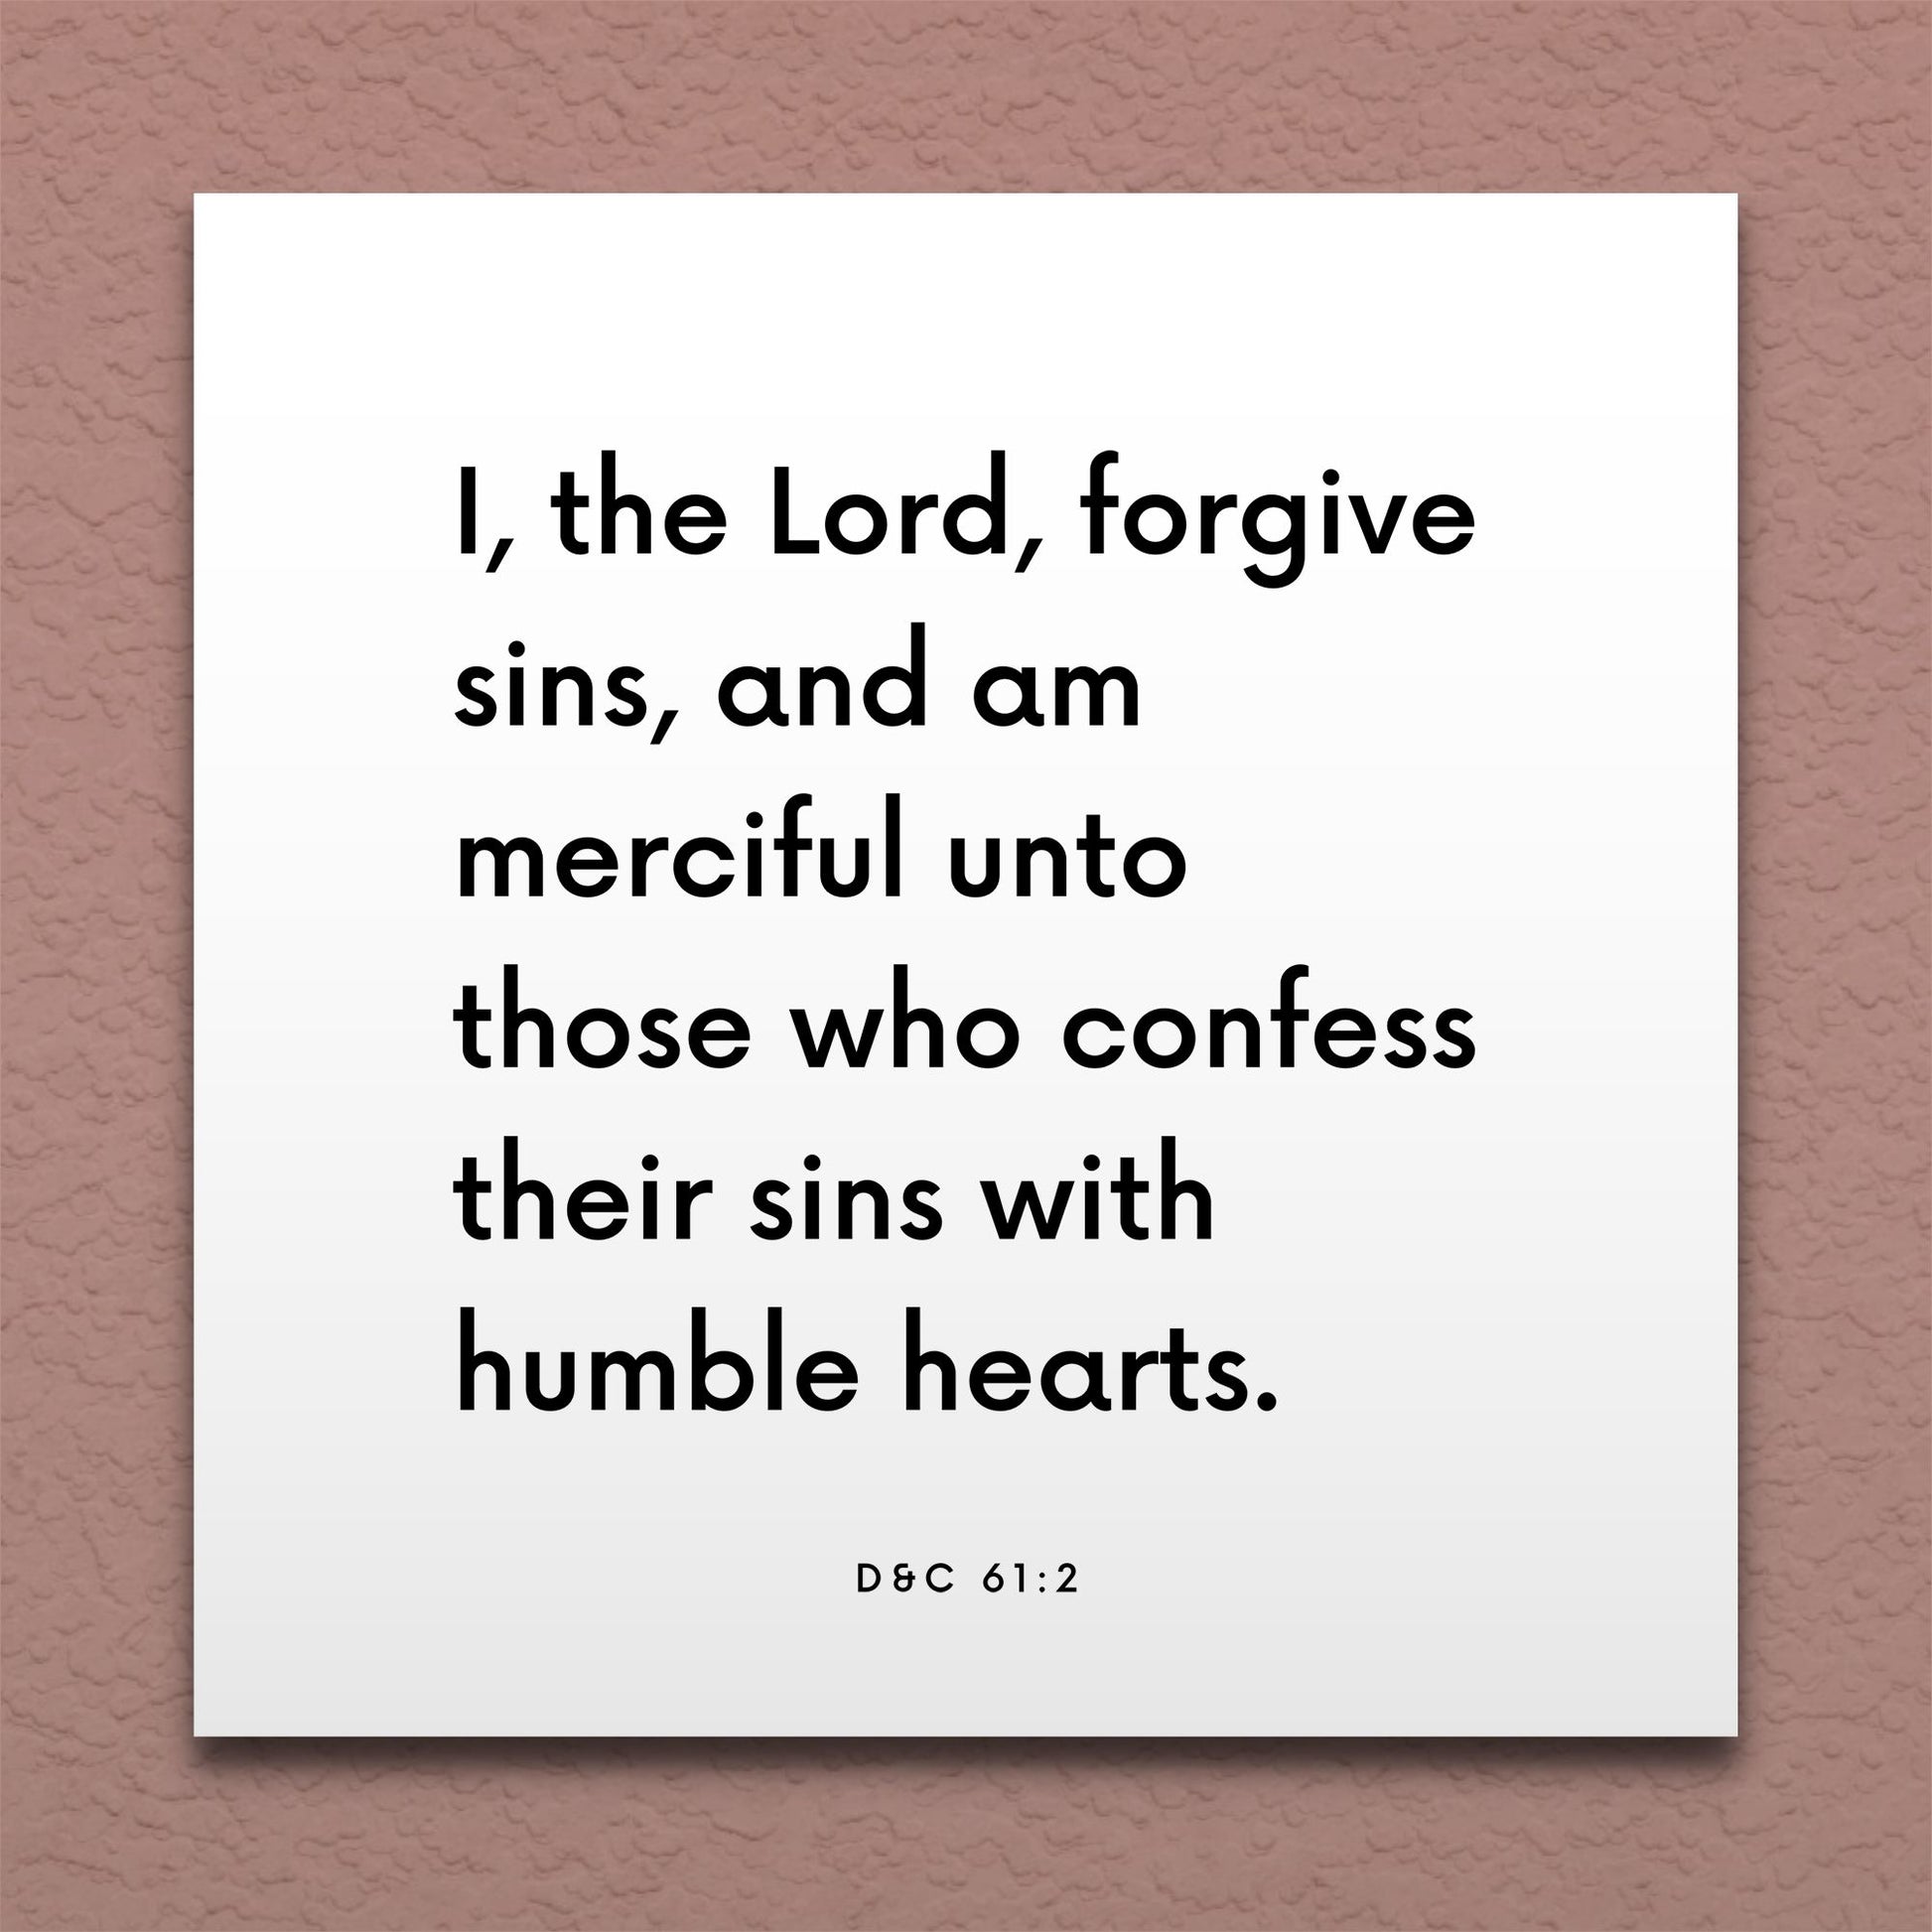 Wall-mounted scripture tile for D&C 61:2 - "I, the Lord, forgive sins, and am merciful"